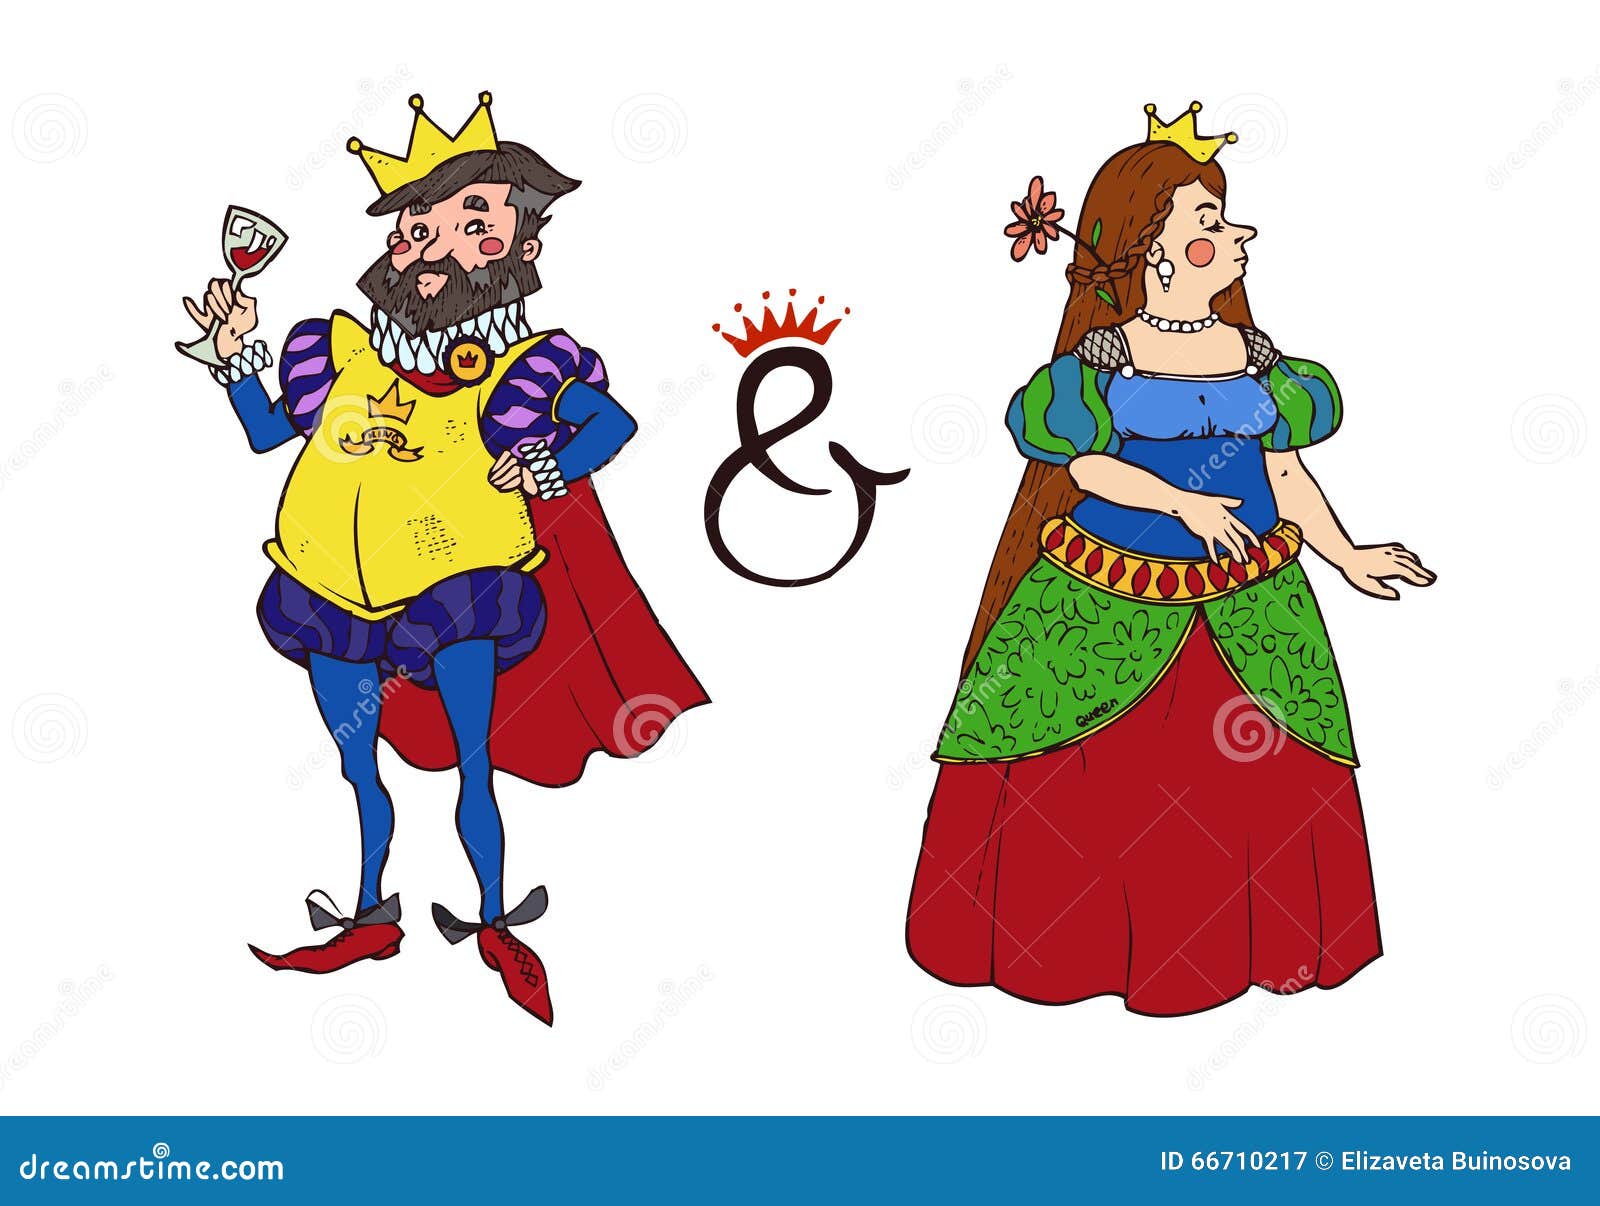 King & Queen stock vector. Illustration of cutout - 66710217